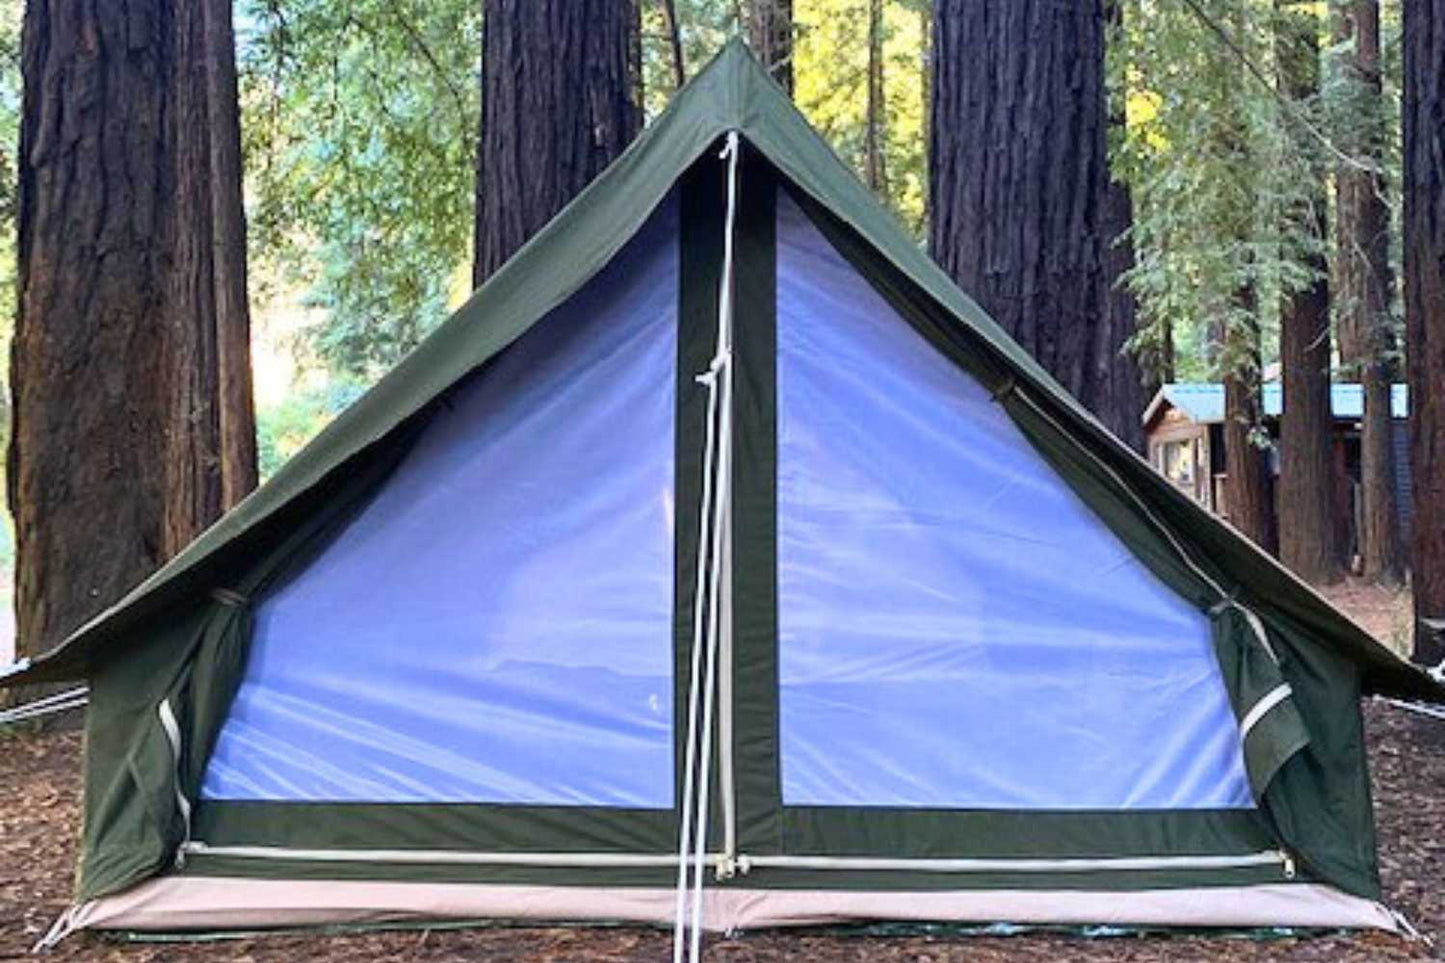 Life inTents Canvas Tent Life inTents Scout About™ Canvas A-Frame Tent 4 Person